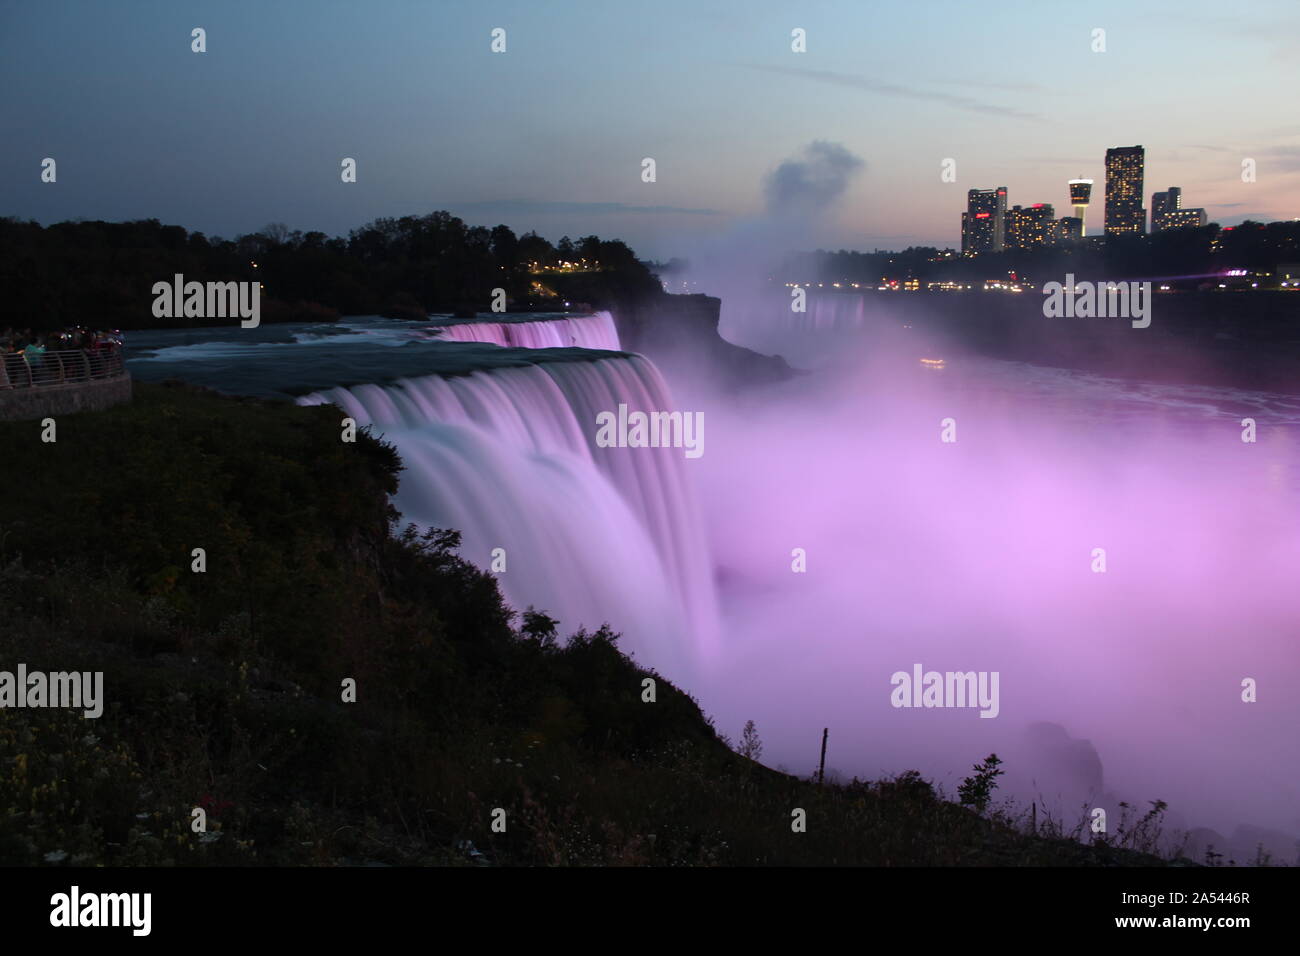 Wide view of Niagara Falls illuminated pink in evening as seen from USA, with water flow all blurred, cityscape visible on Canada side Stock Photo